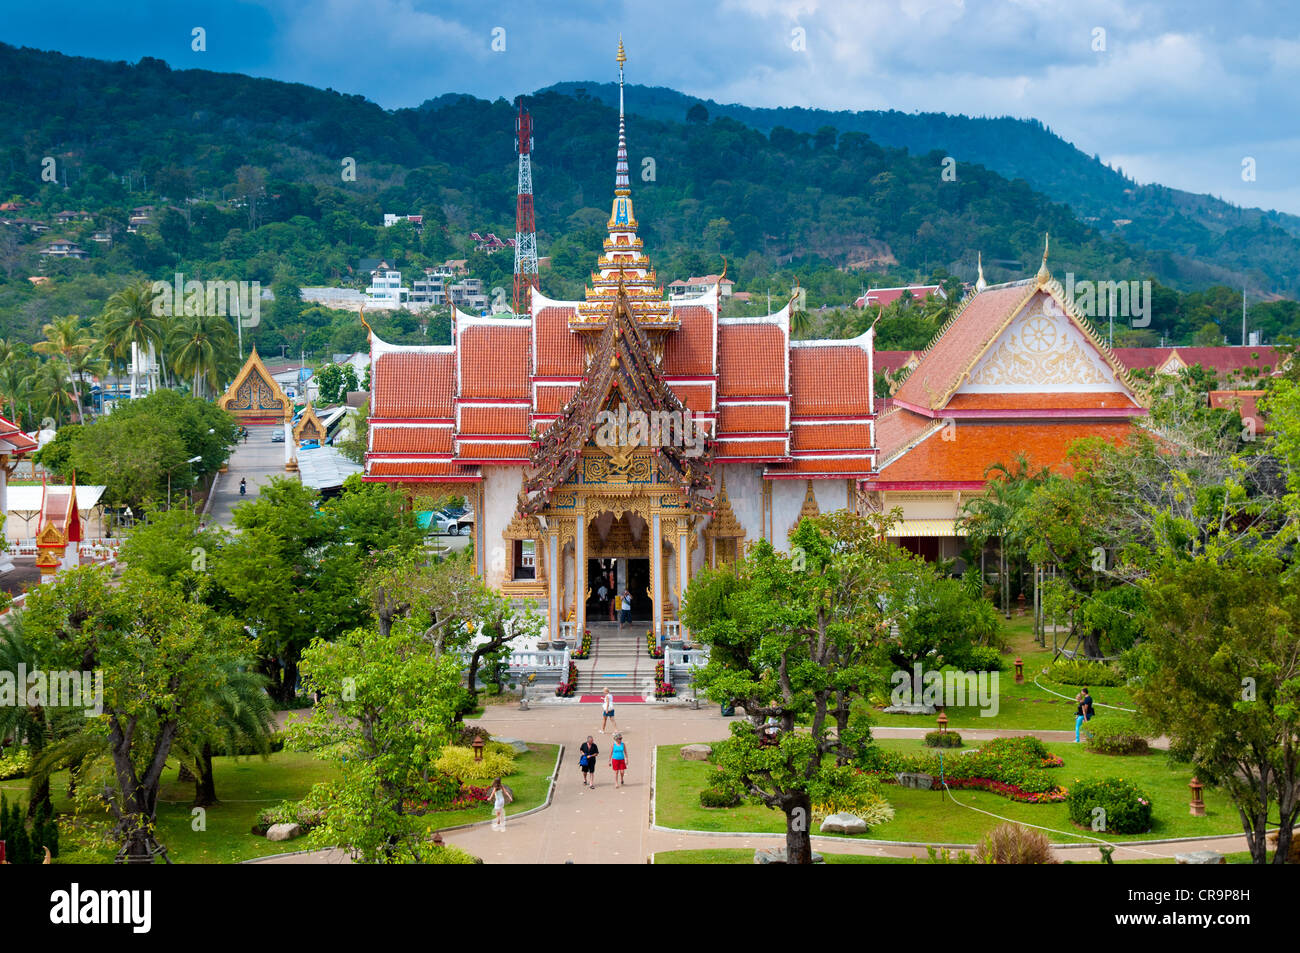 Wat Chalong most important buddist temple in Phuket, Thailand Stock Photo